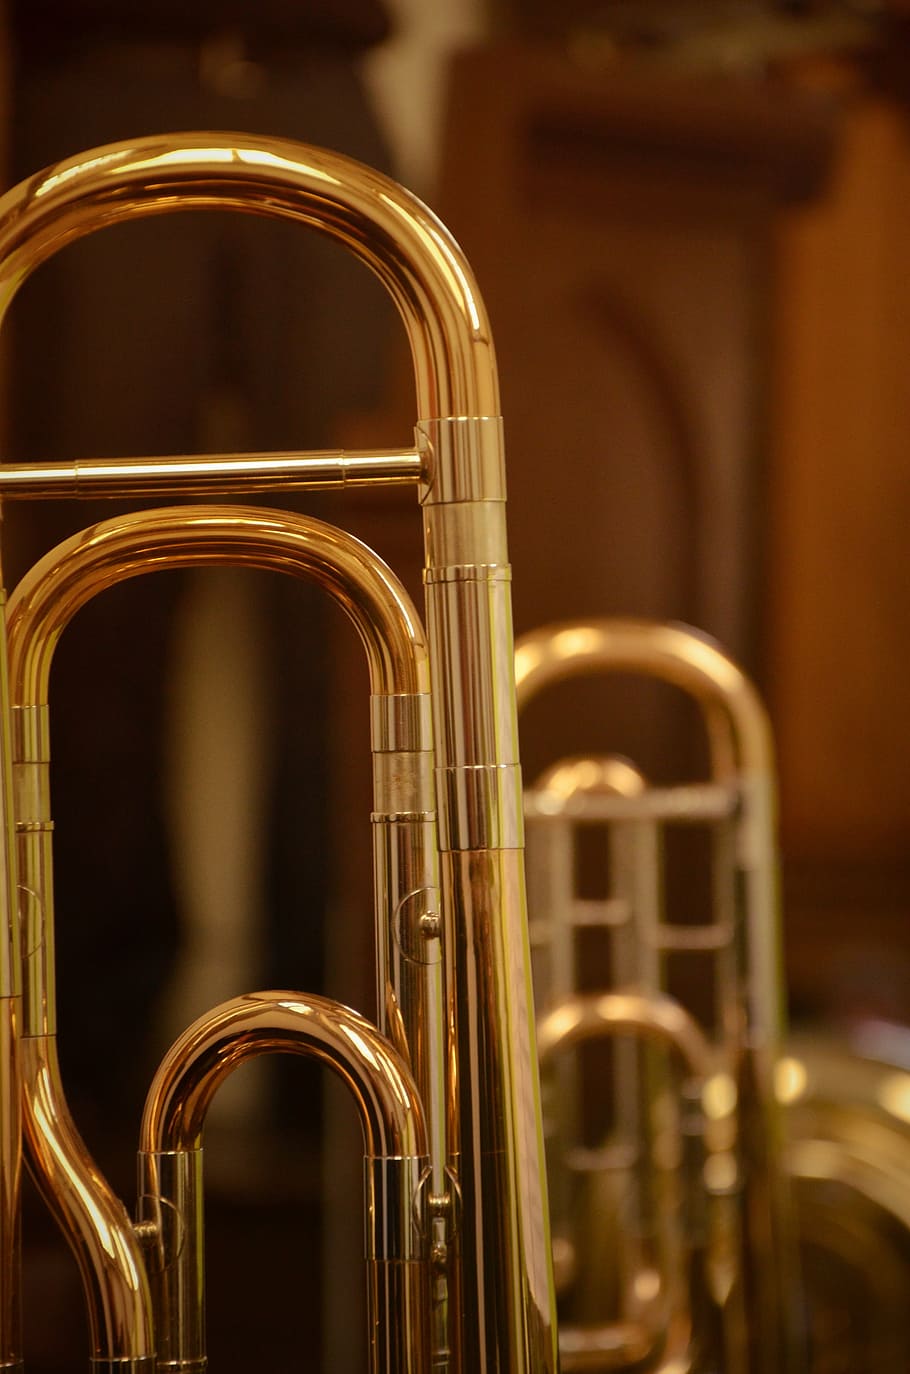 brass-colored wind instruments, trombone, trumpet, close, instrument, brass, golden, wind instrument, brass band, classic